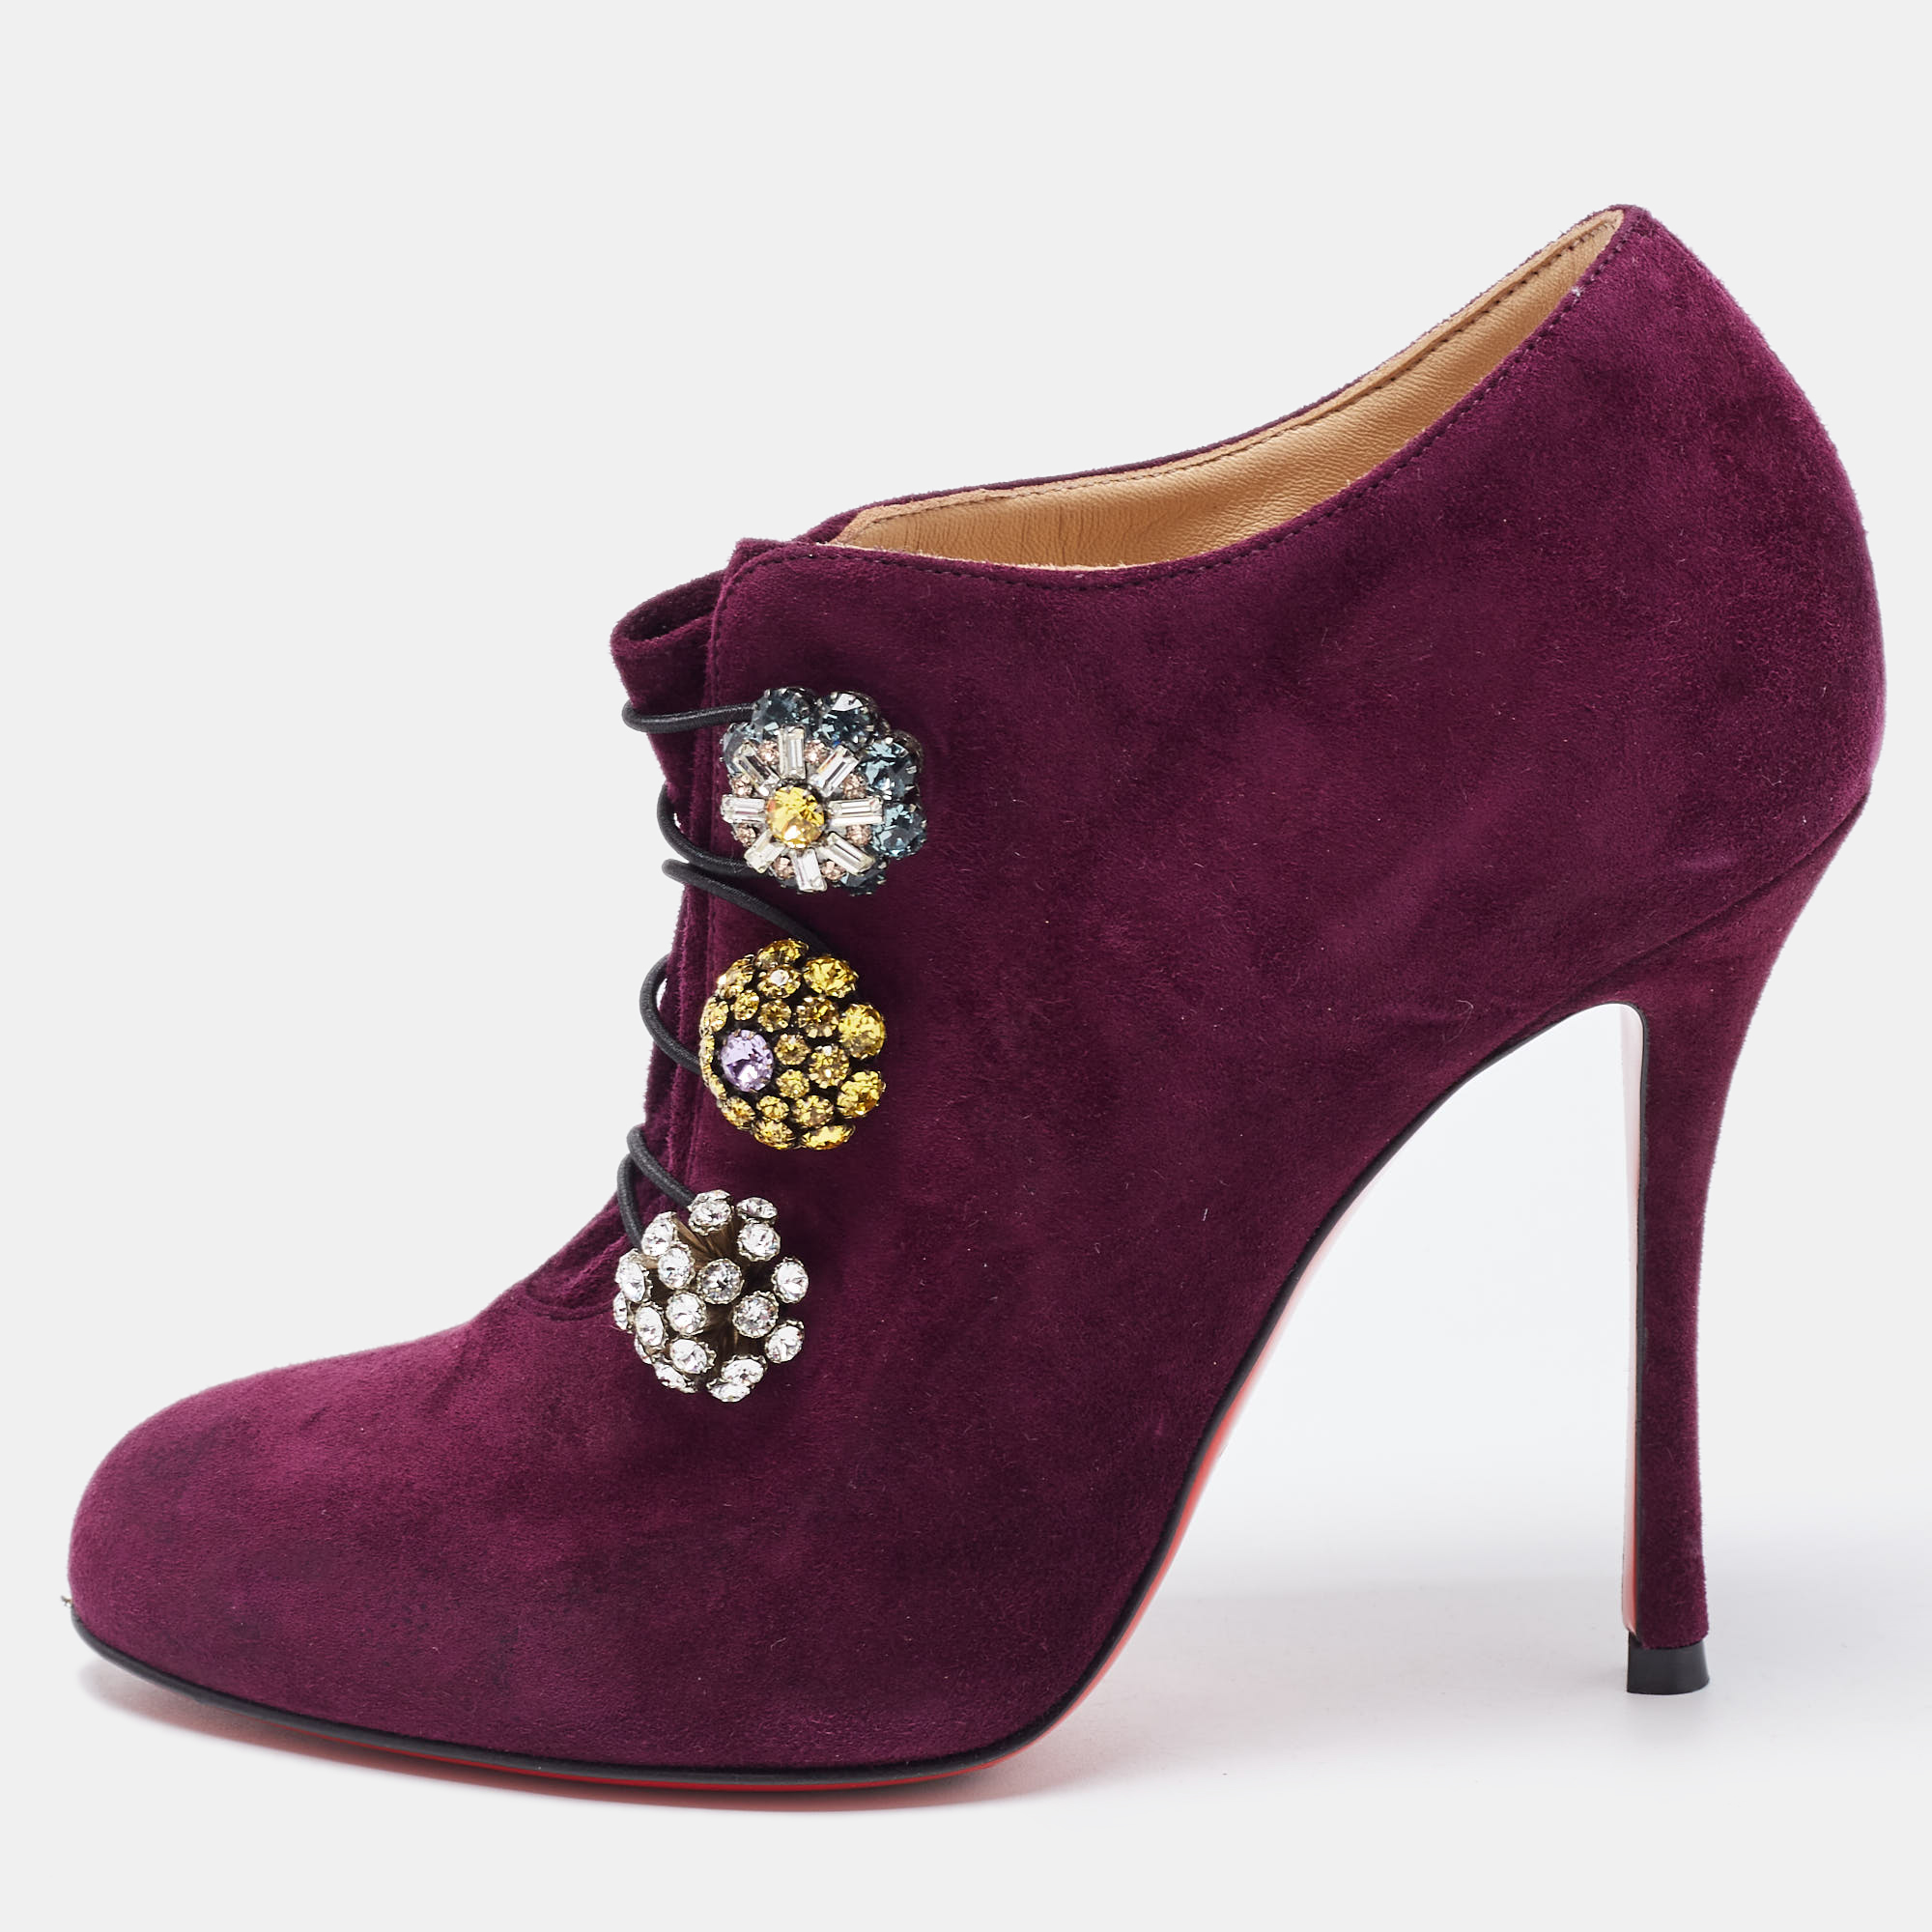 Christian Louboutin Purple Suede Booties Size 35.5